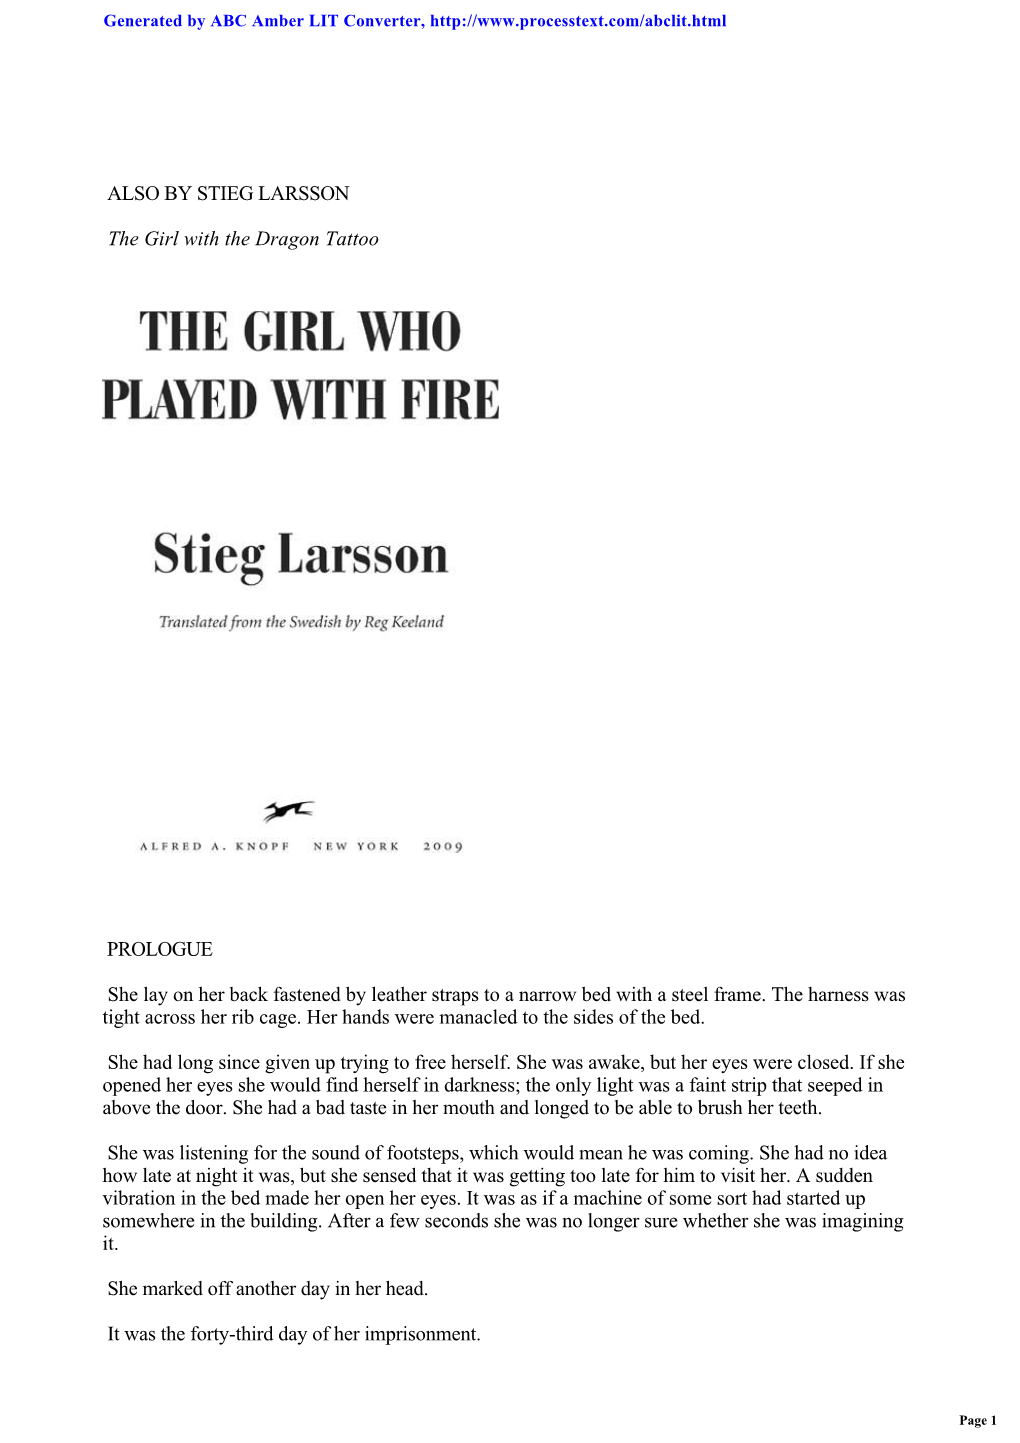 ALSO by STIEG LARSSON the Girl with the Dragon Tattoo PROLOGUE